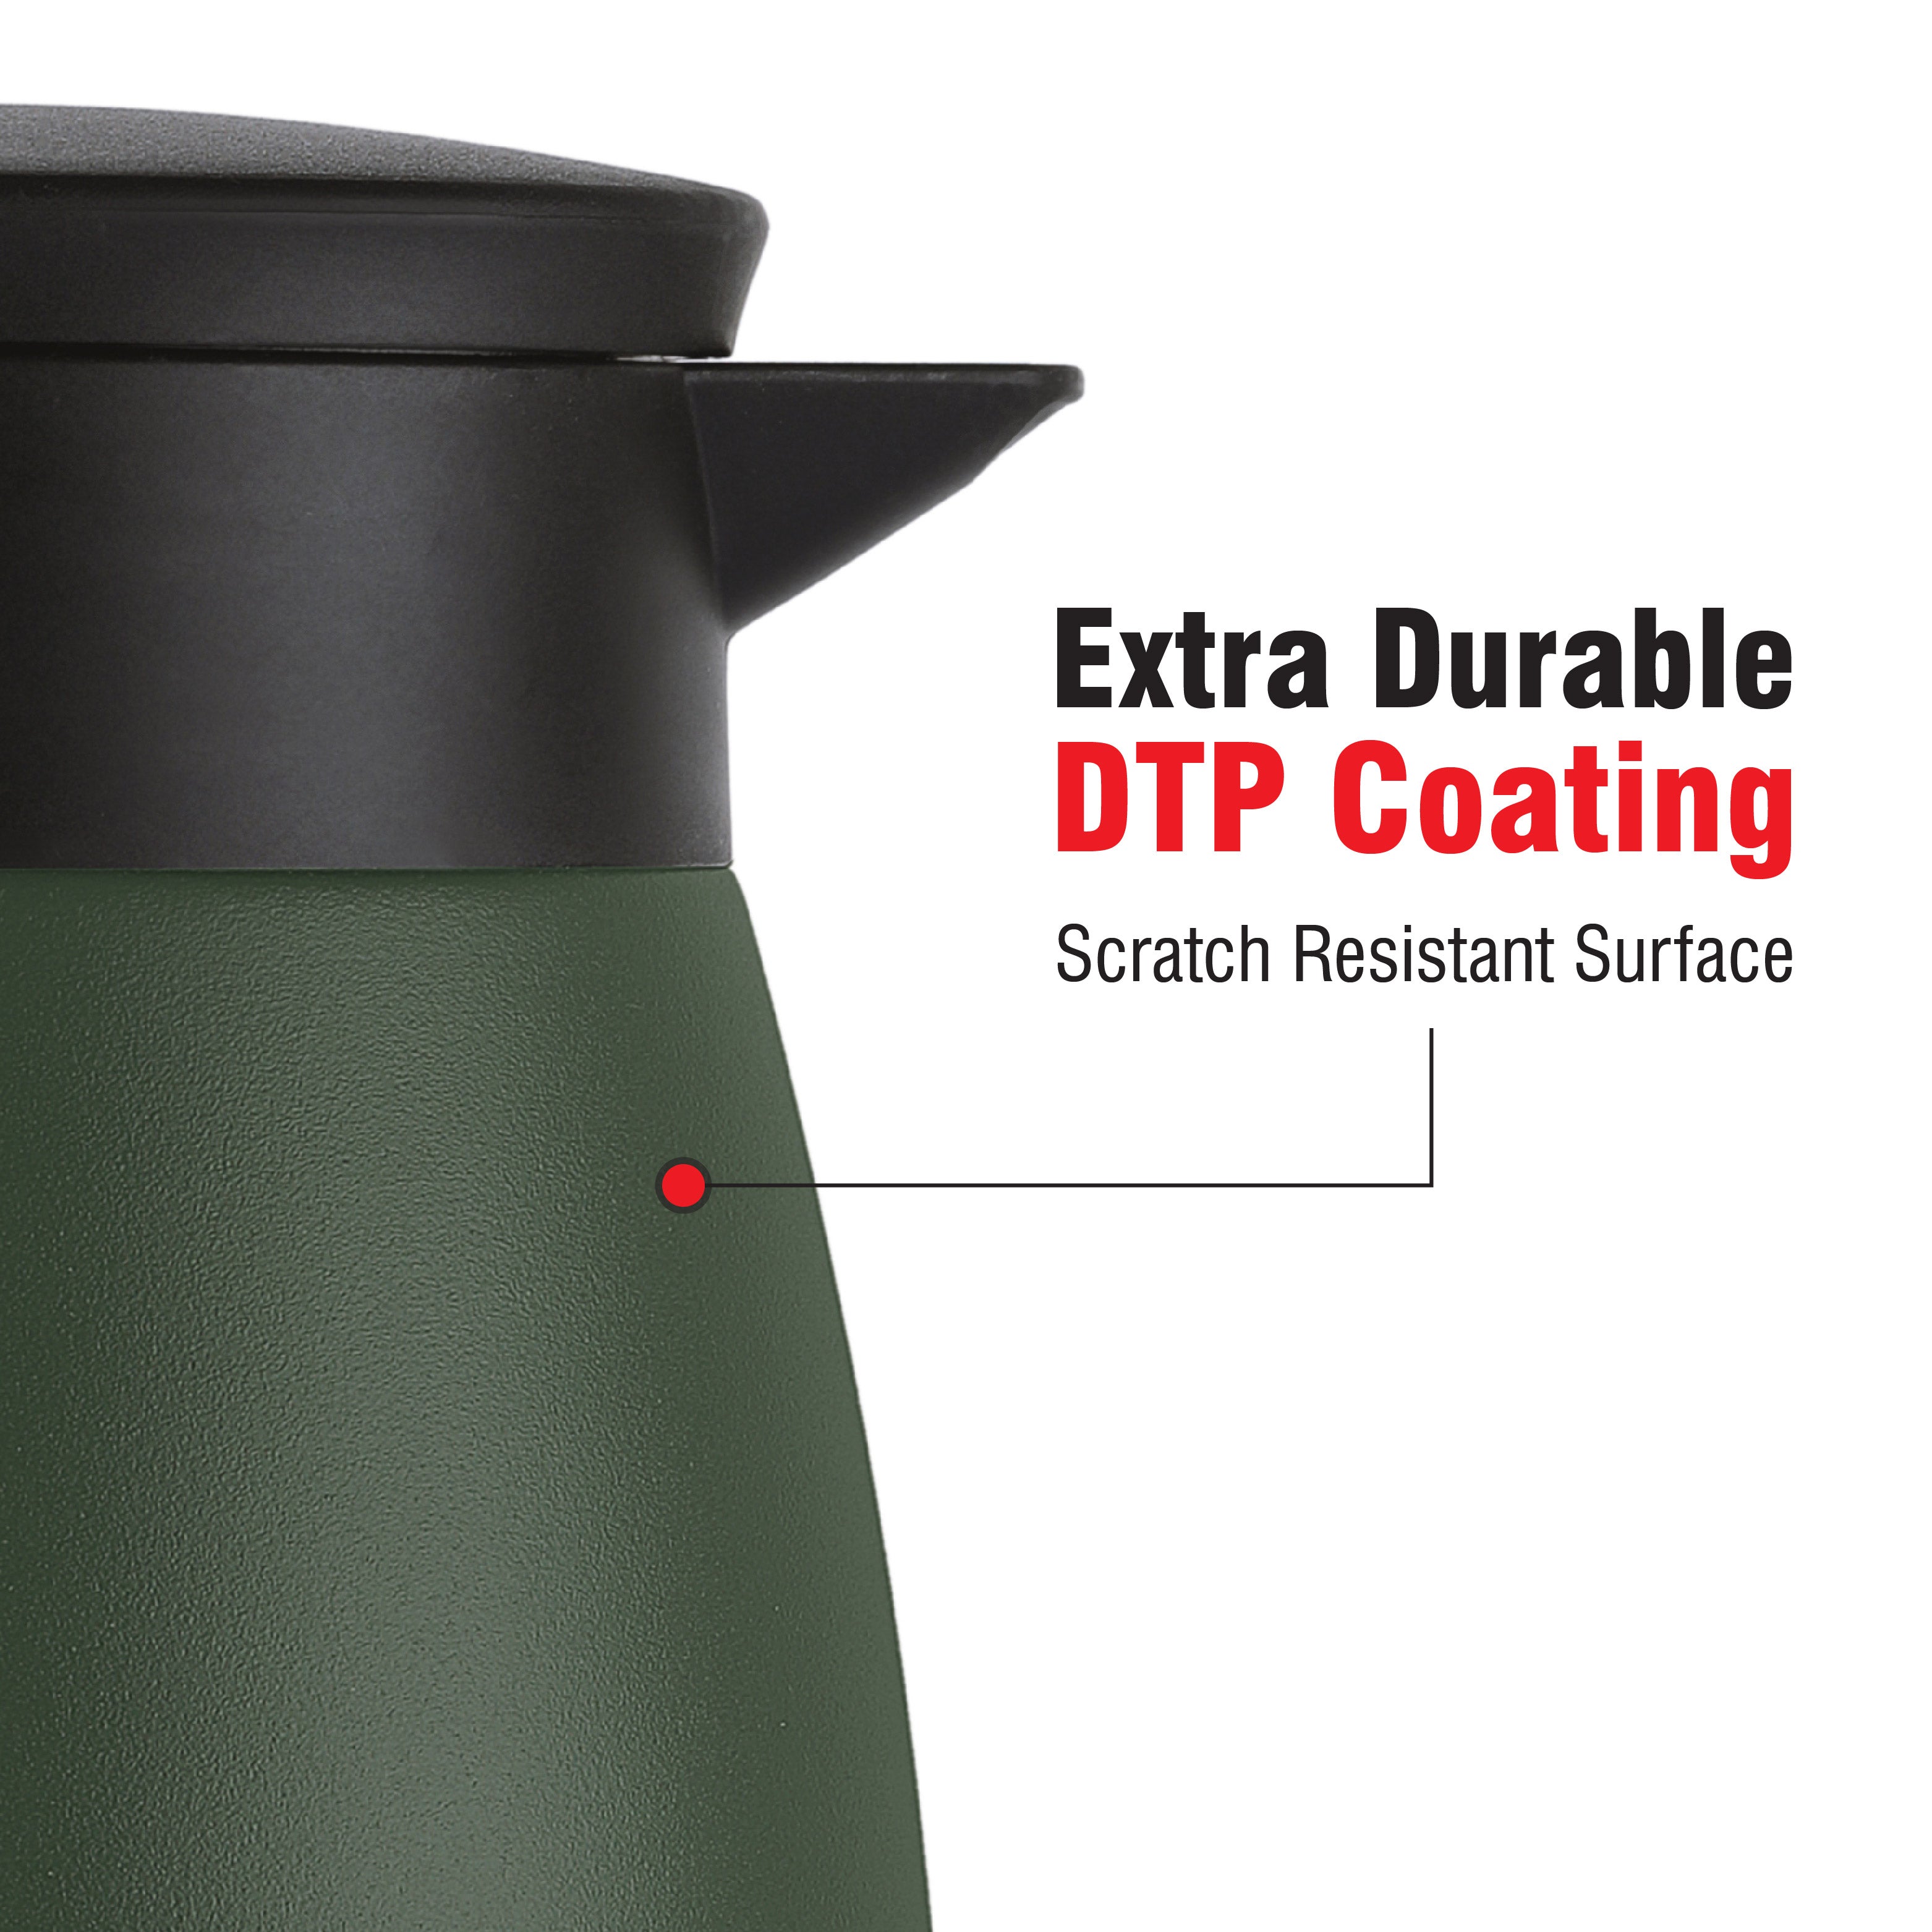 Duro Pot Double Walled Vacuum Insulated Teapot, 800ml Green / 800ml / 1 Piece